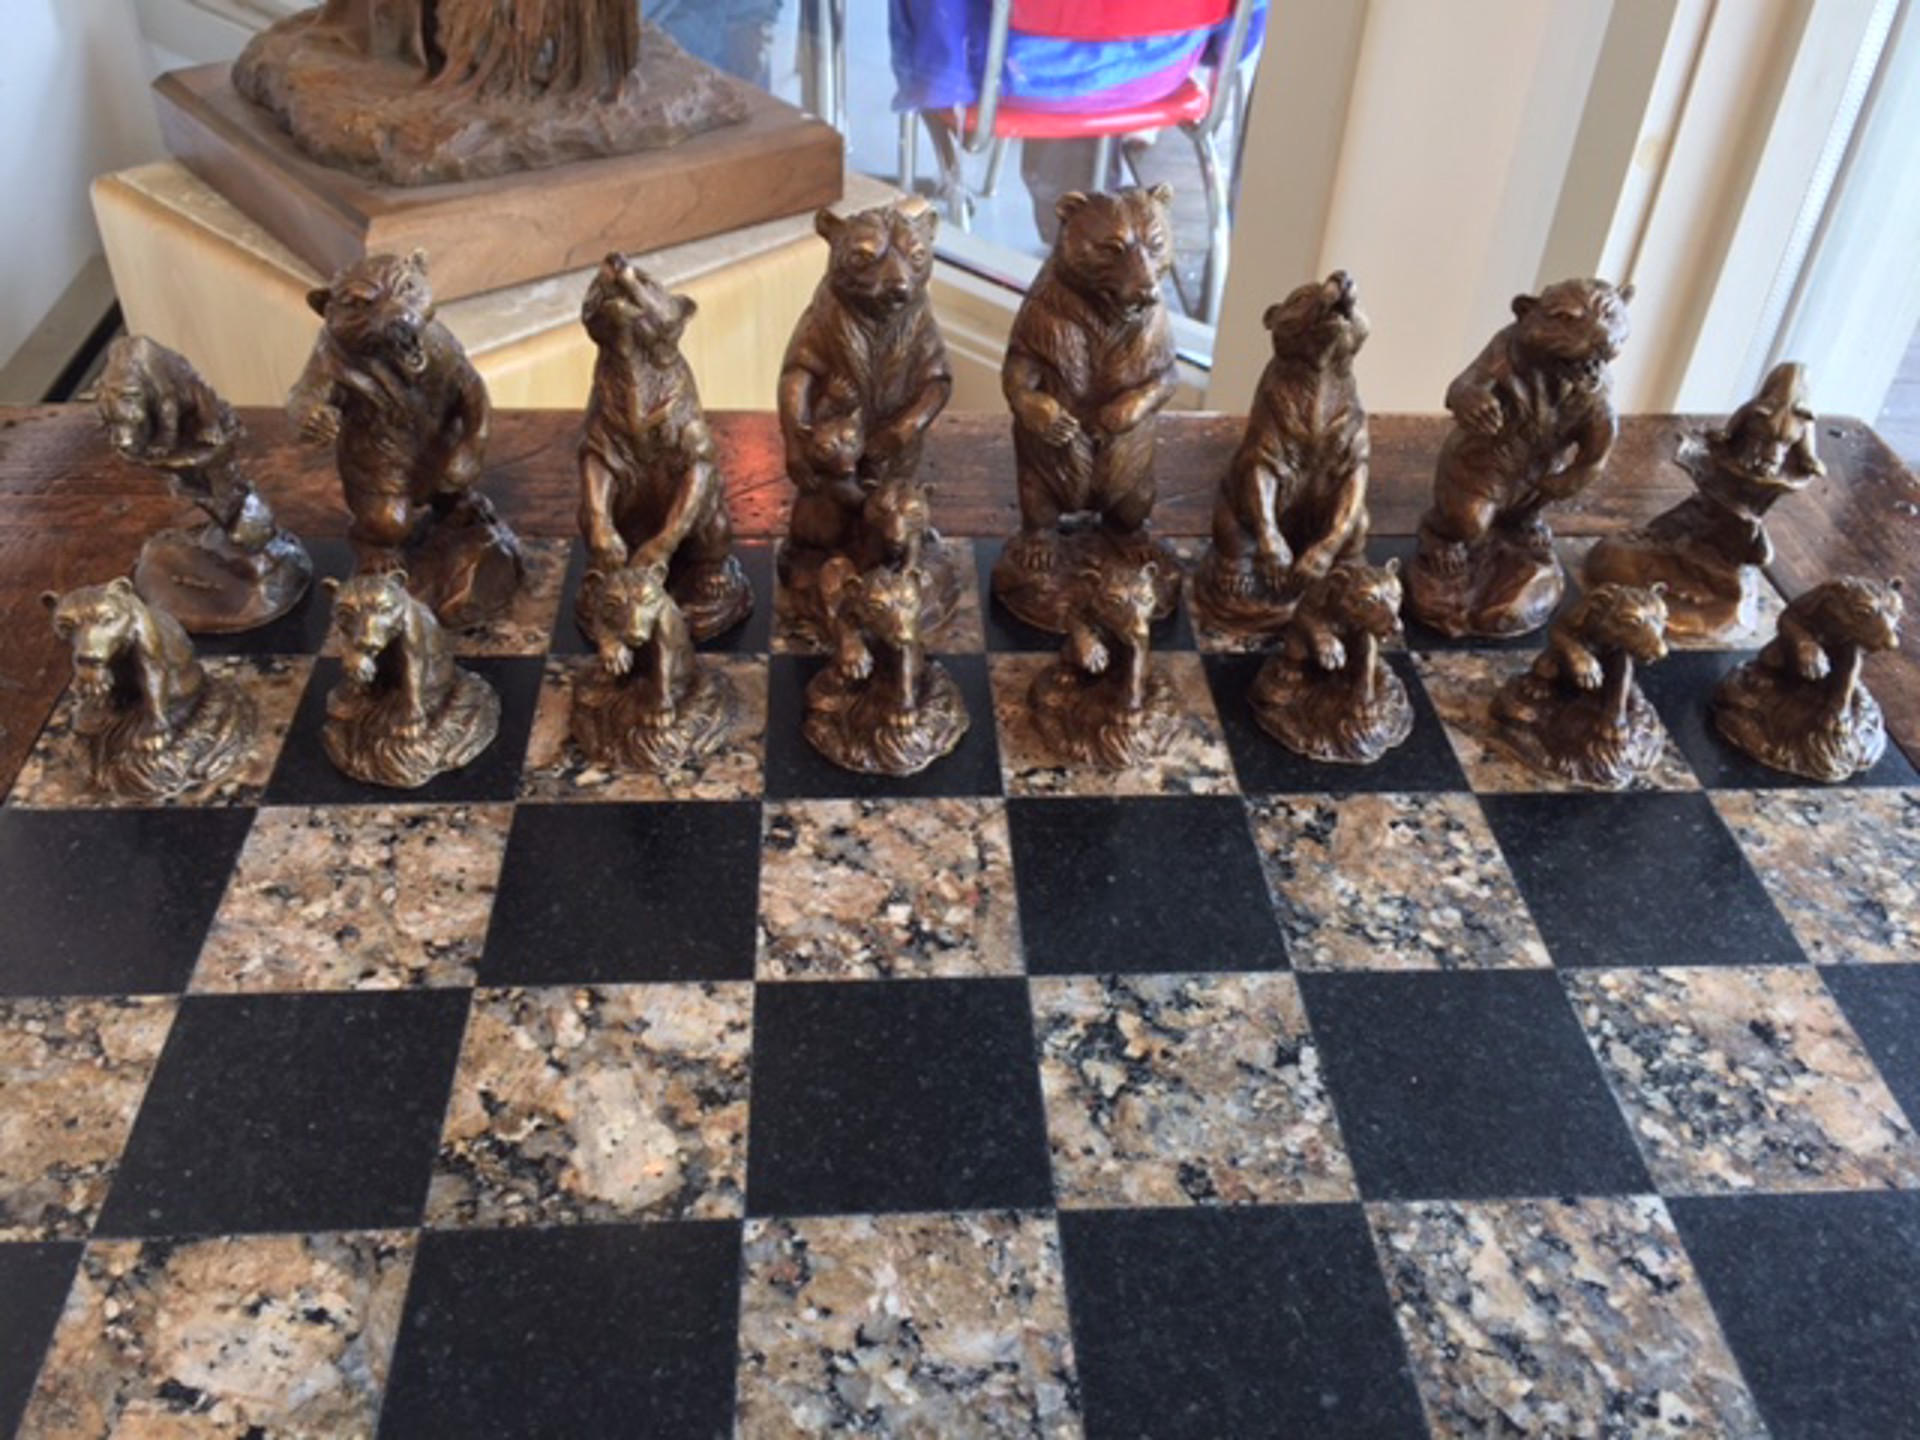 Bear Chess'd - No Table - 32 Bronzes Only (16 Black Bears and 16 Grizzlies) by Tim Whitworth